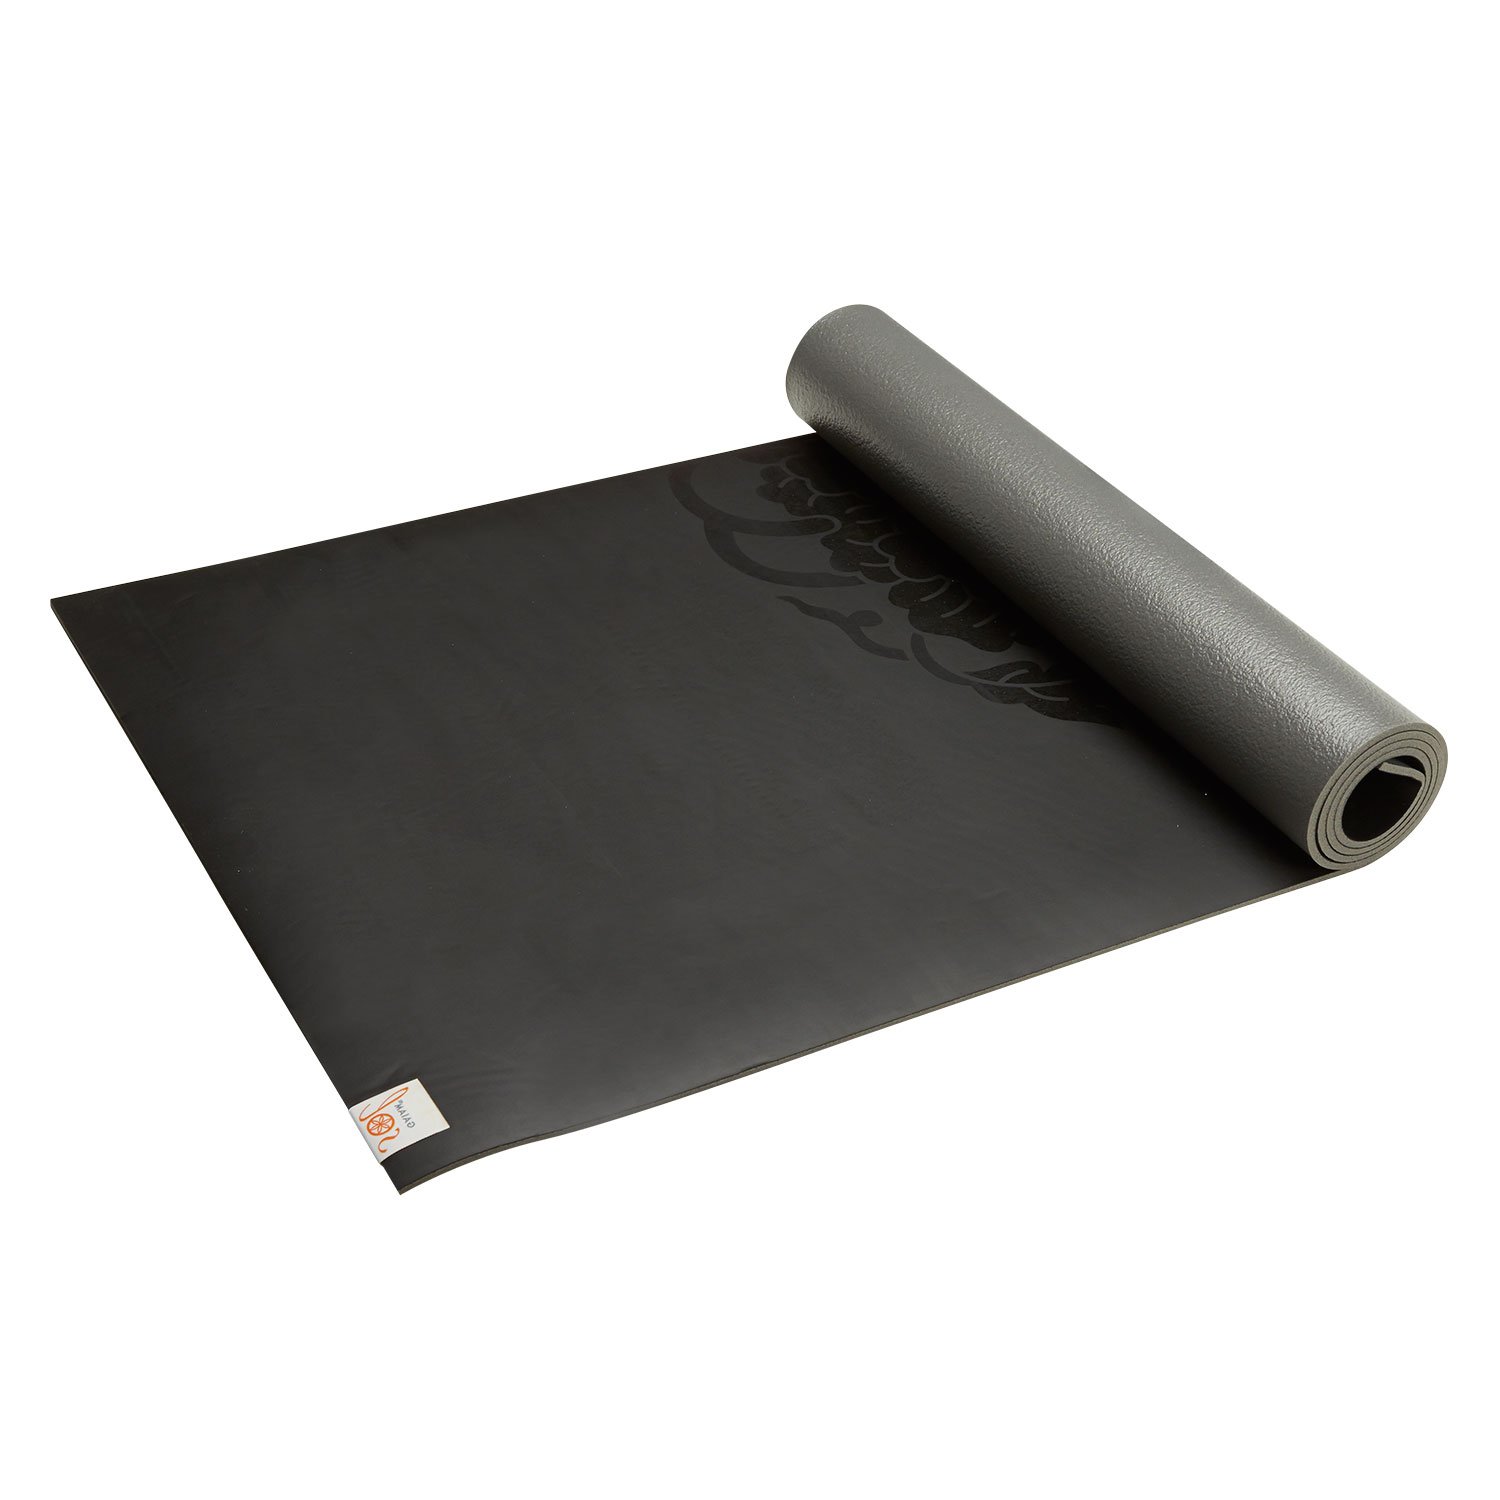 Gaiam Dry-Grip Yoga Mat - 5mm Thick Non-Slip Exercise & Fitness Mat for Standard or Hot Yoga, Pilates and Floor Workouts - Cushioned Support, Non-Slip Coat - 68 x 24 Inches